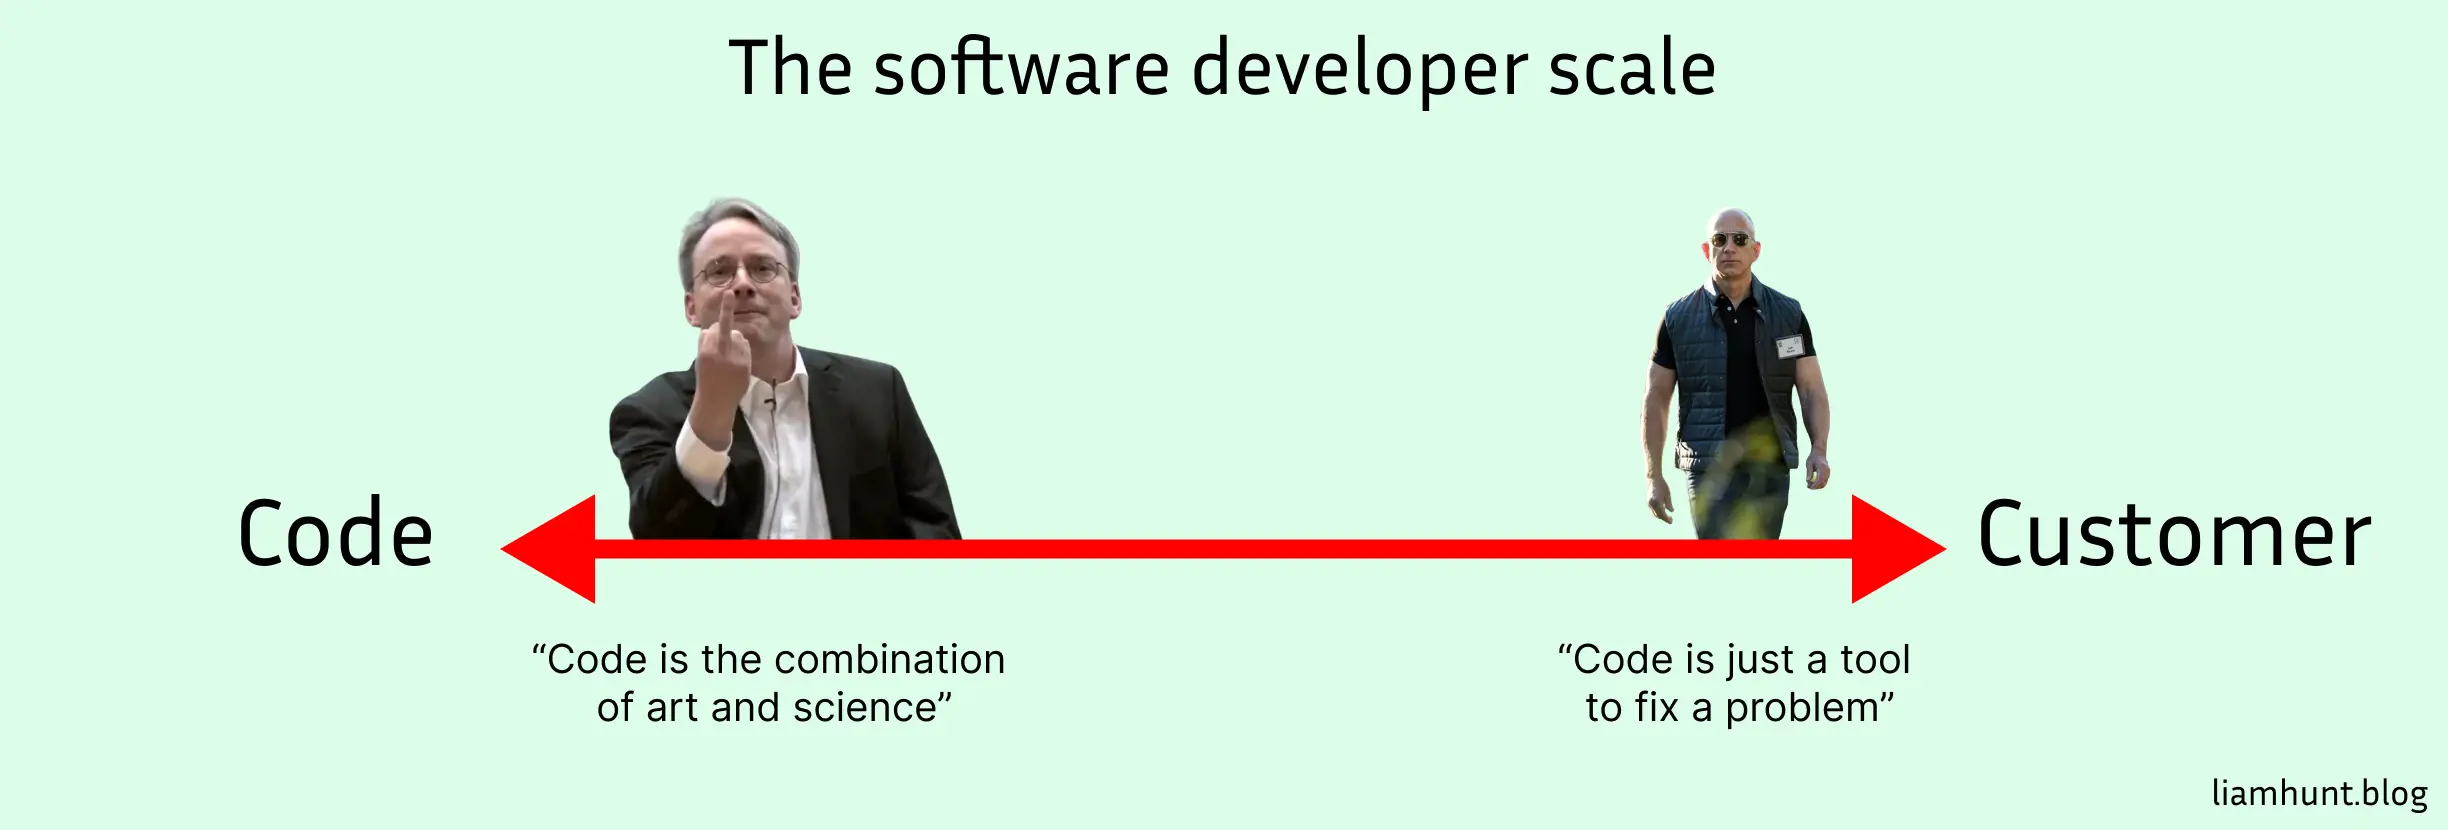 Focusing on code or customer is more of a scale